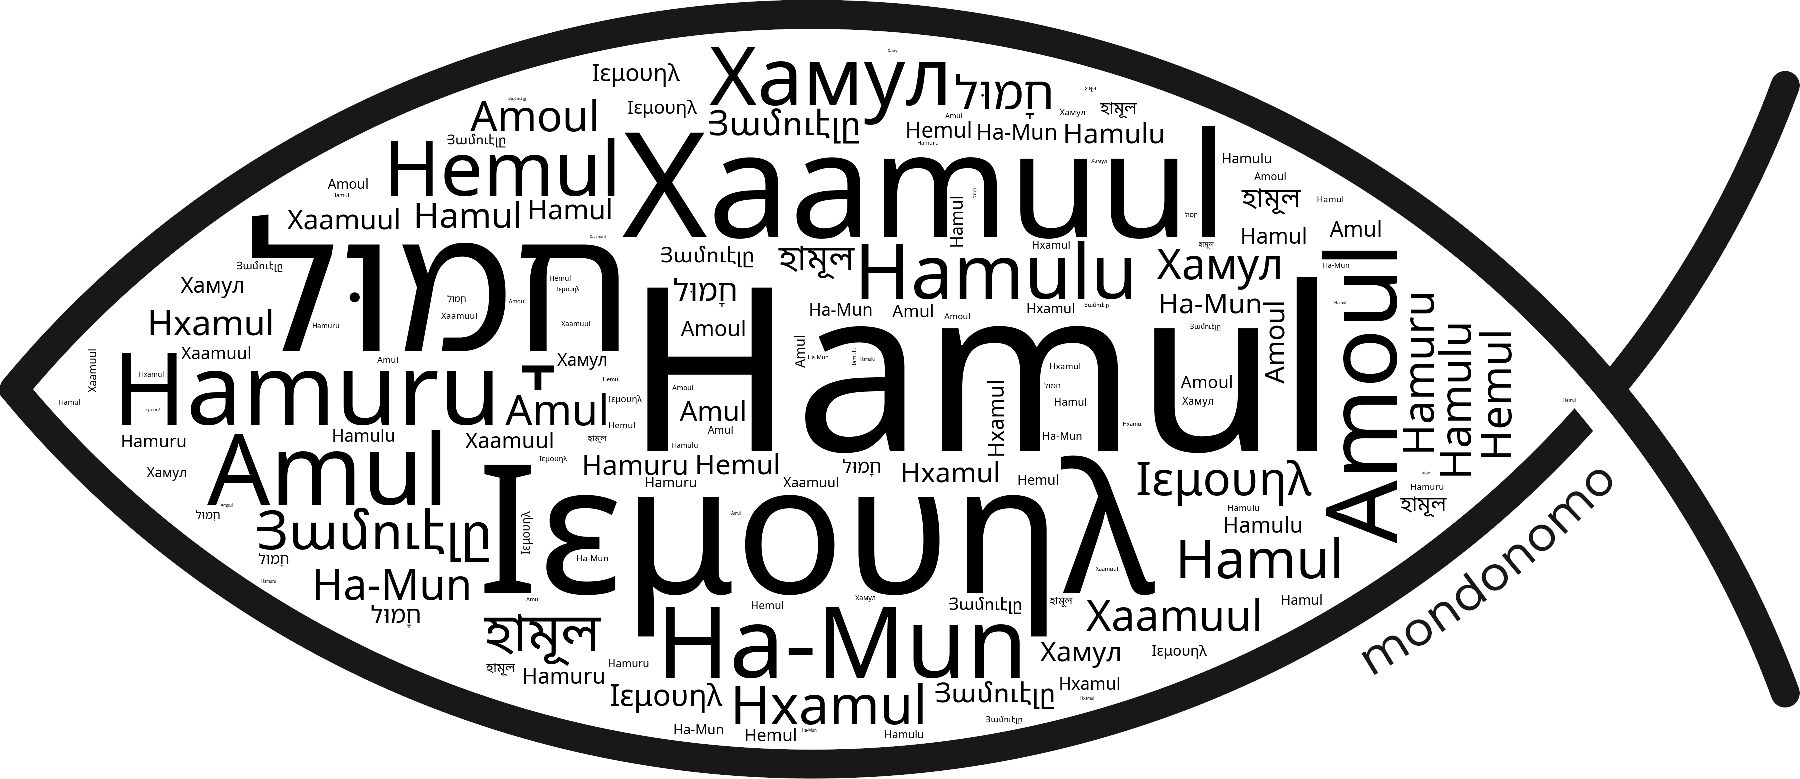 Name Hamul in the world's Bibles